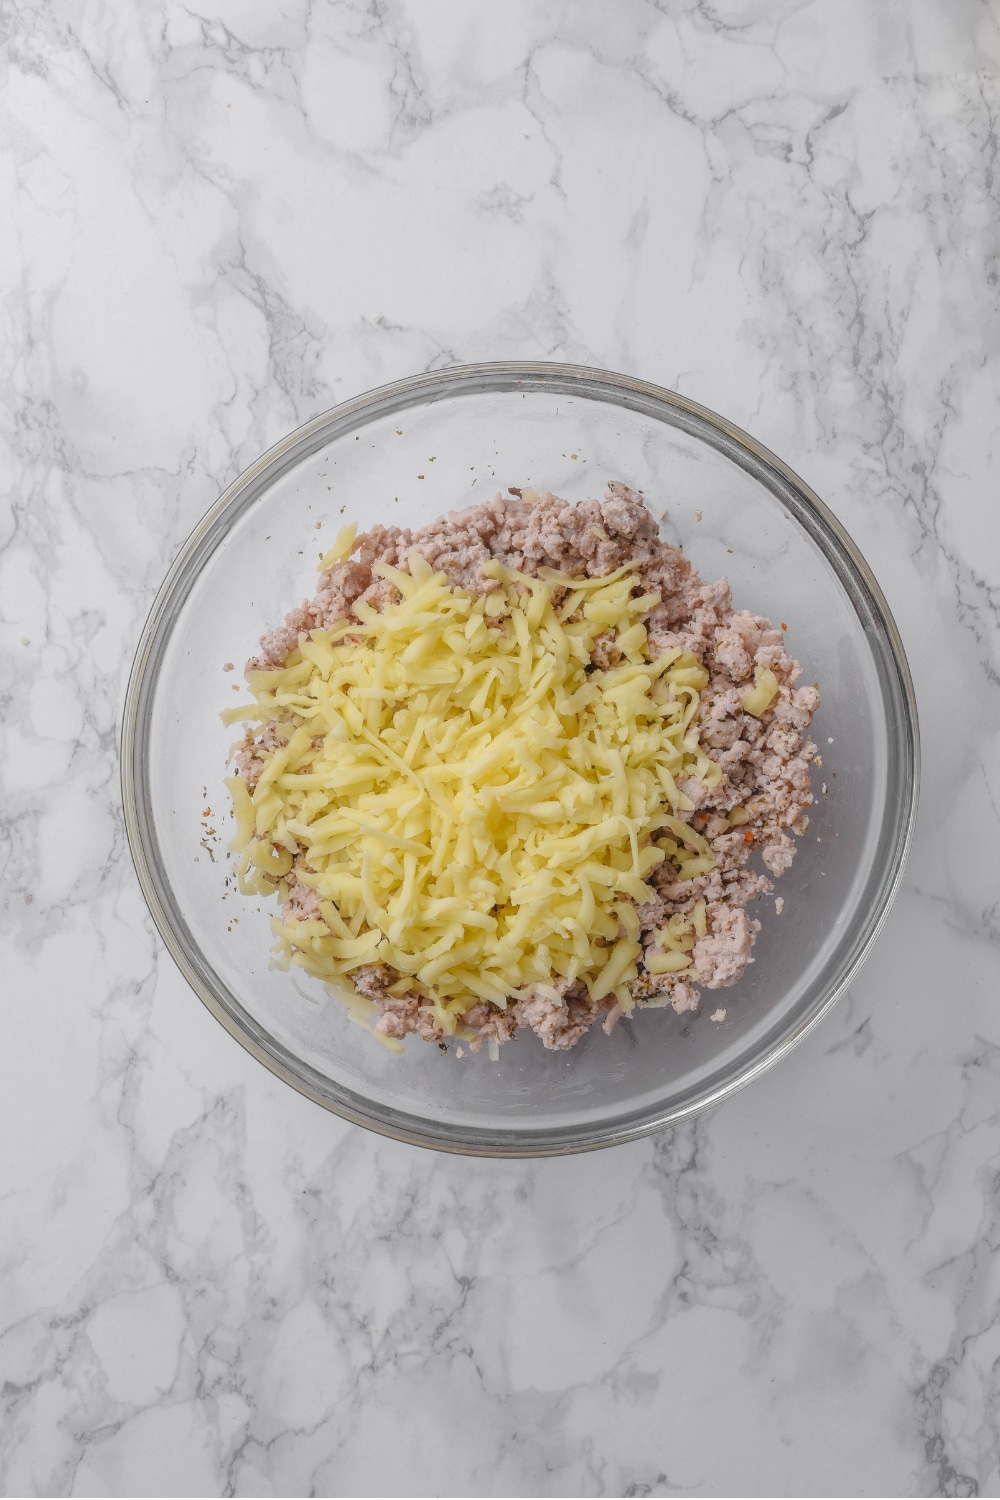 A glass bowl filled with cooked ground turkey and shredded cheese on top a white marble countertop.